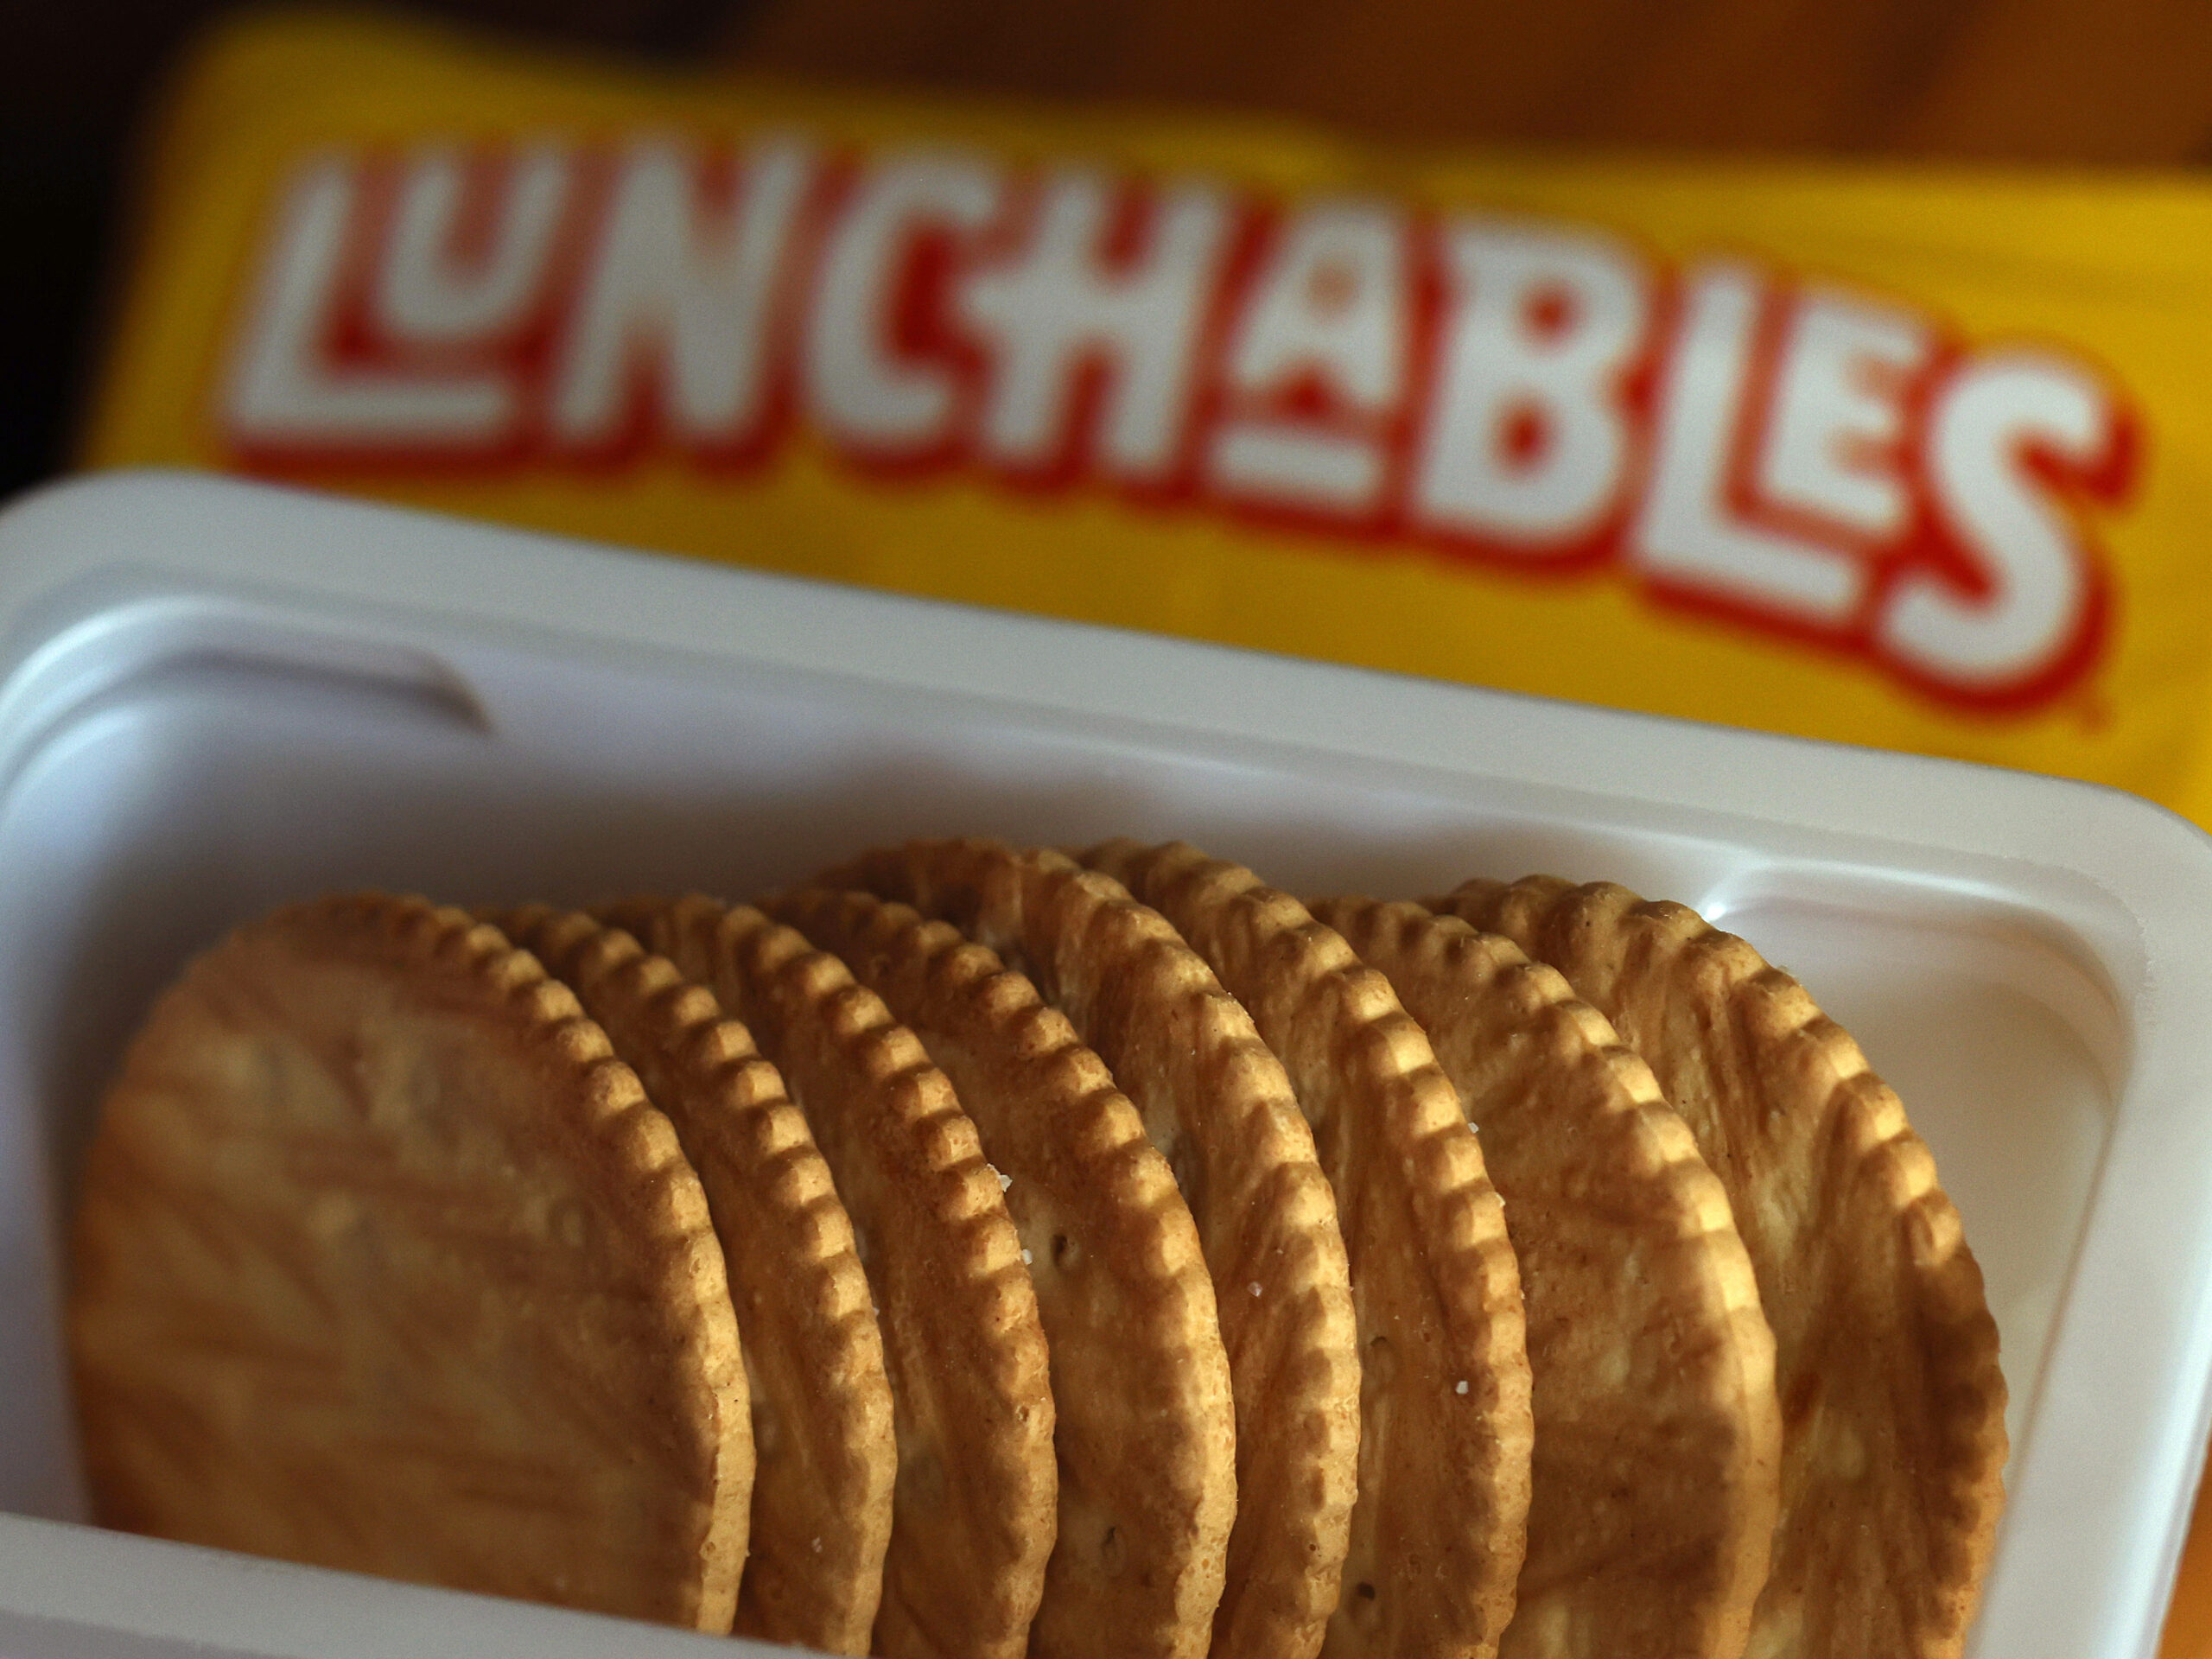 Consumer Reports asks USDA to remove Lunchables from schools’ lunch menus